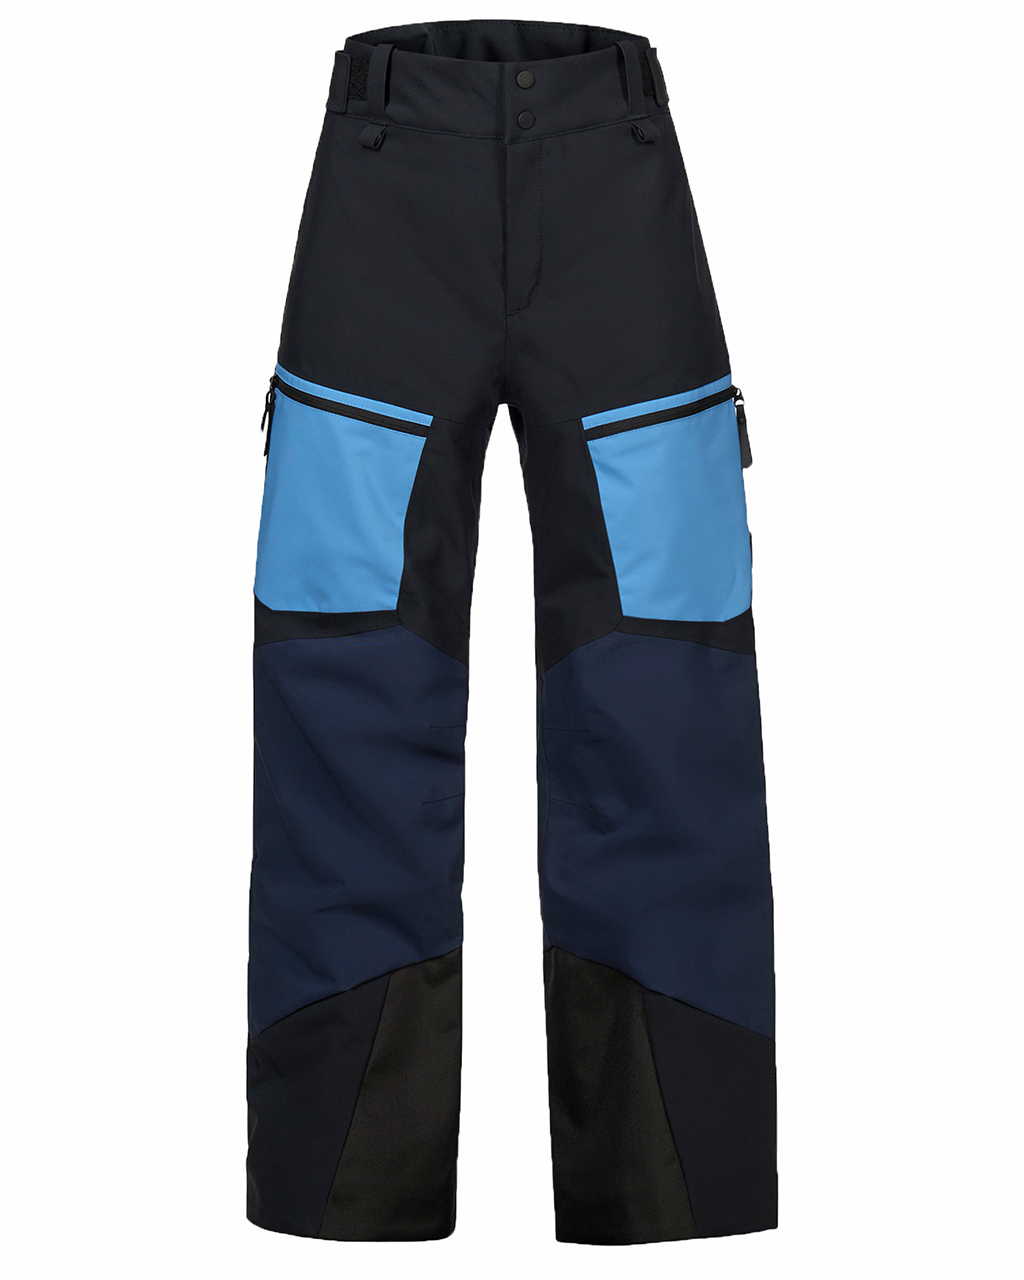 Youth Gravity Pants | Black | DHaRCO Clothing | Reviews on Judge.me